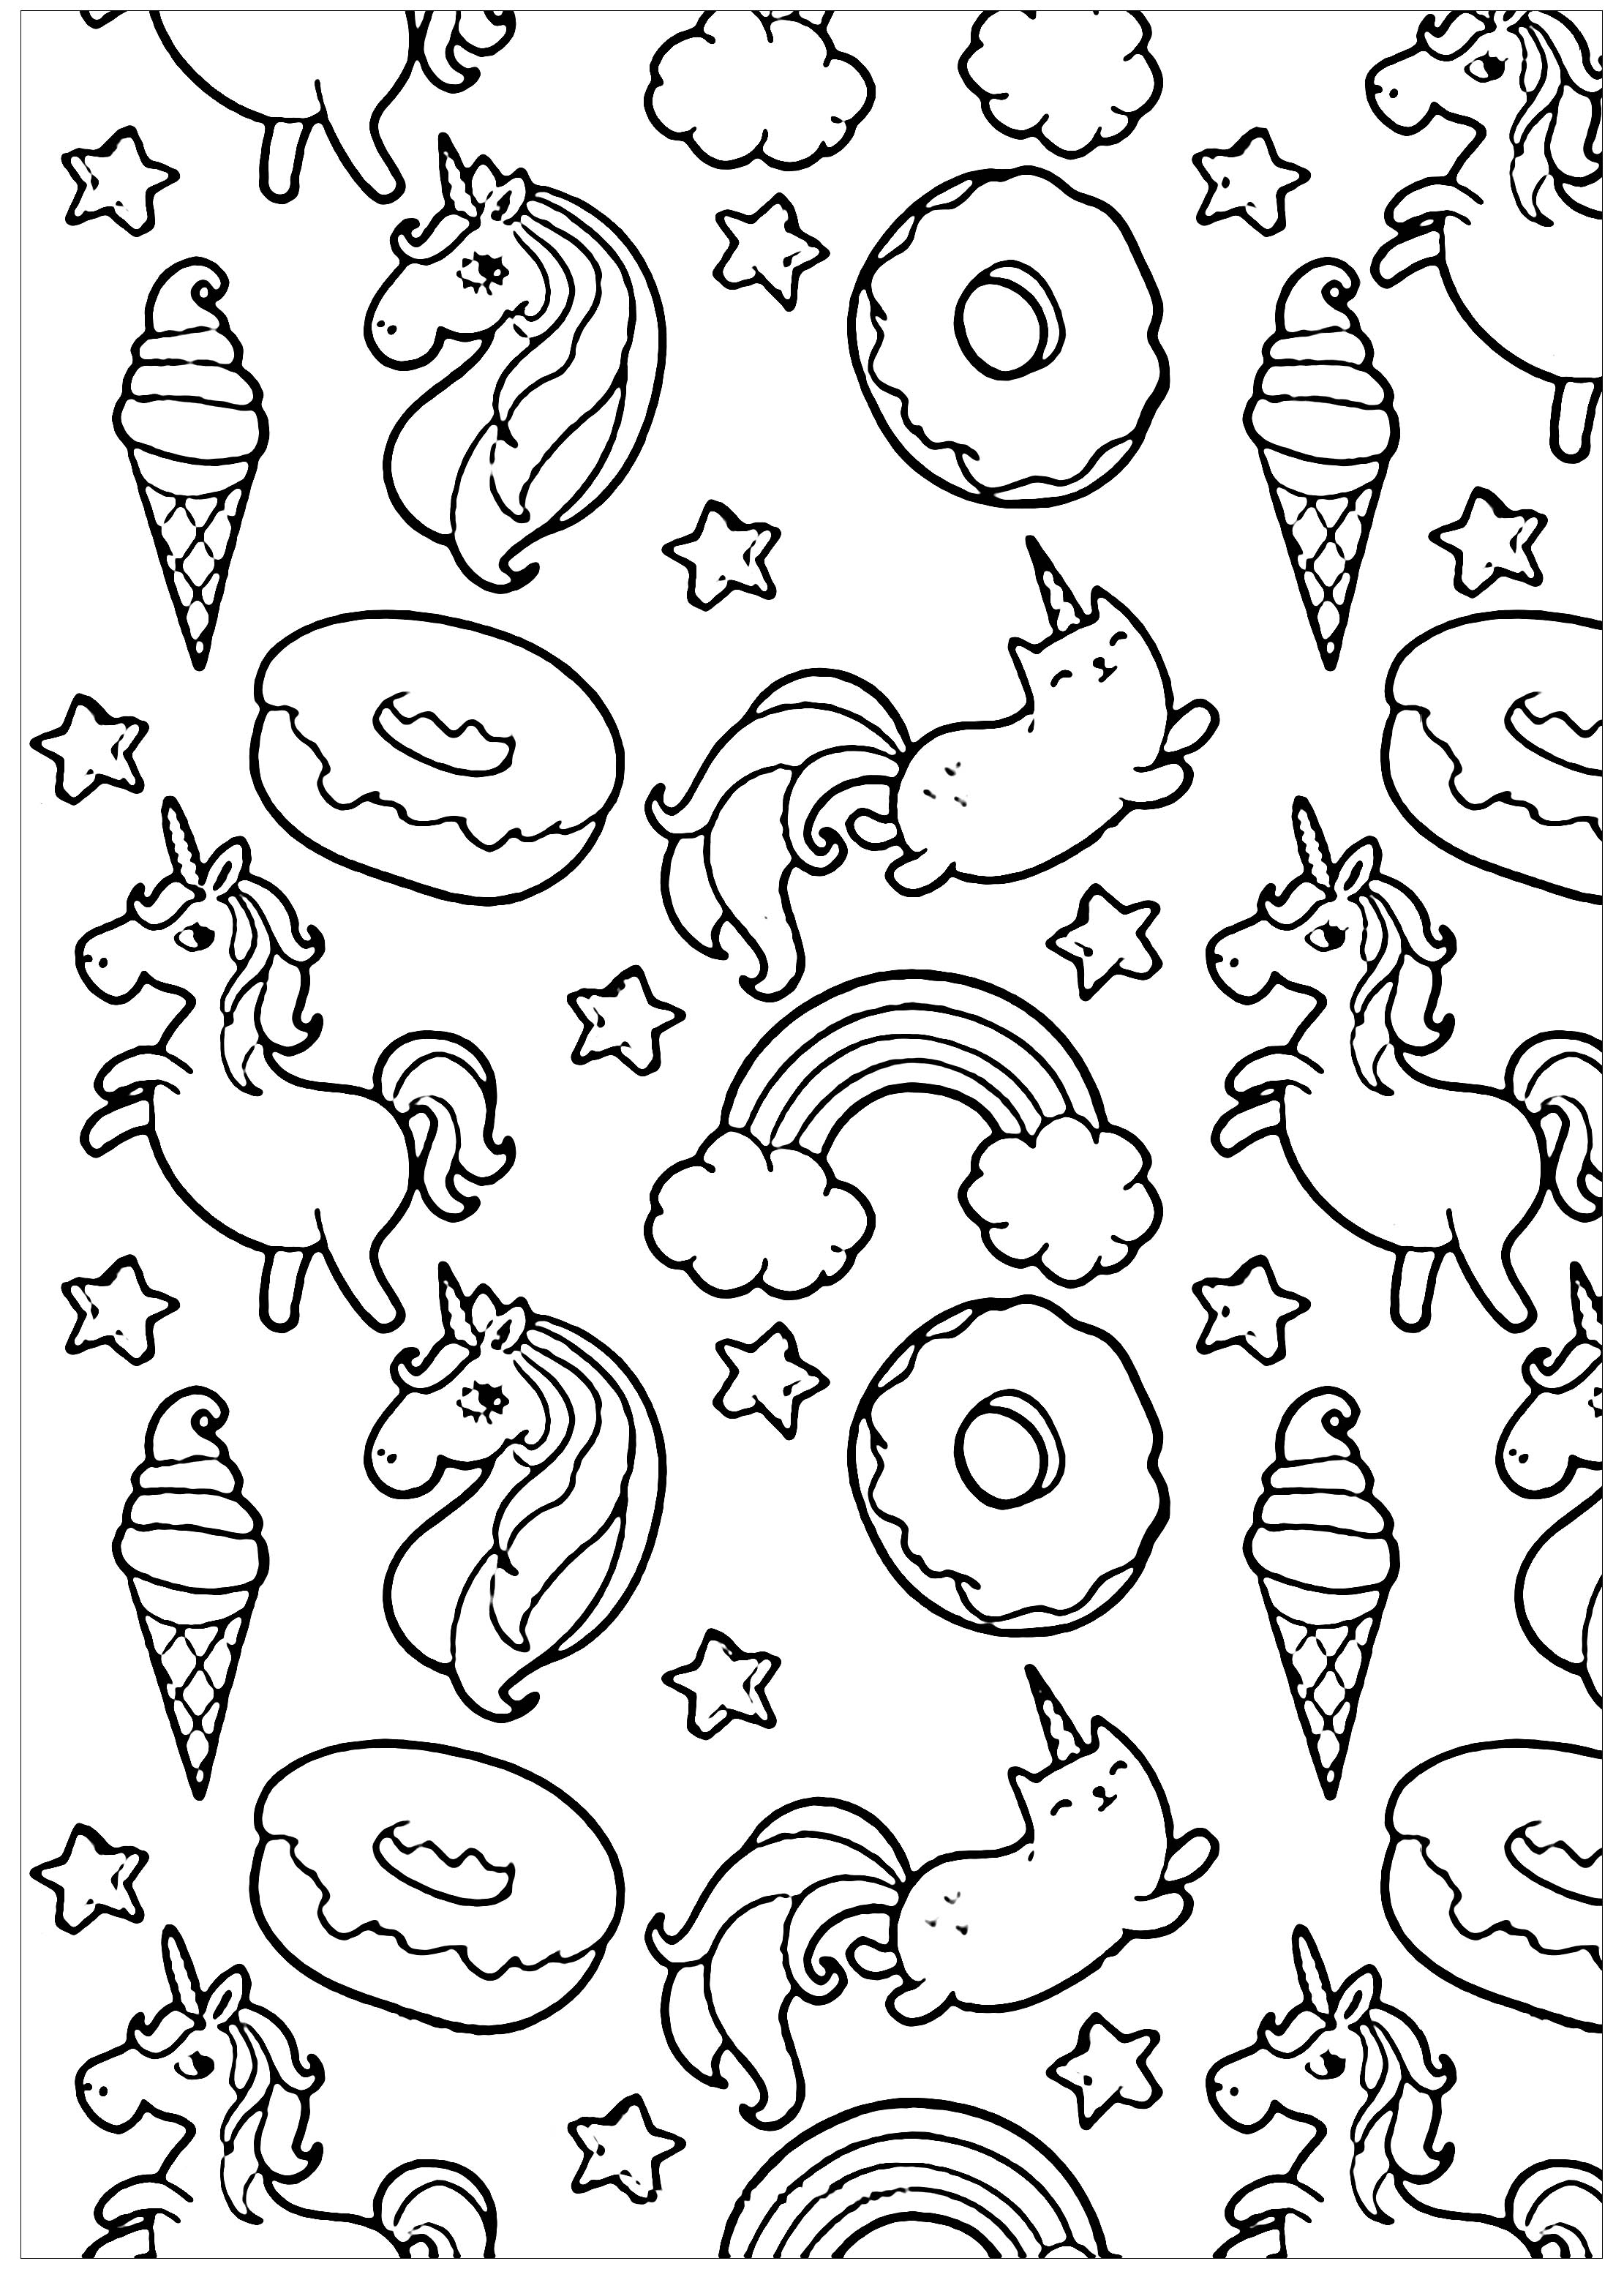 Cool Donut 8 Coloring Page